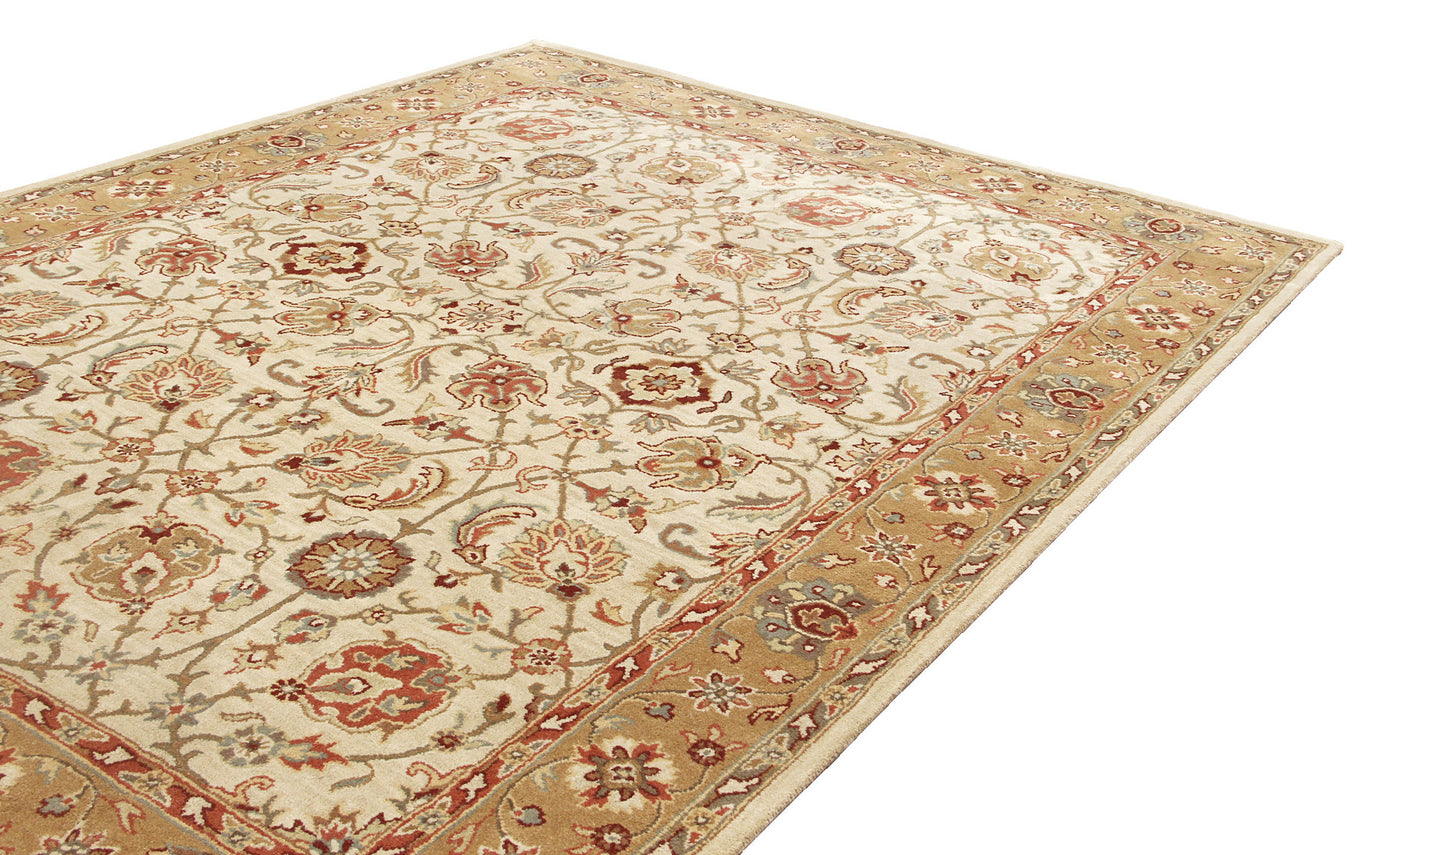 Brand New Brant Brown Wool Persian Style Area Rug